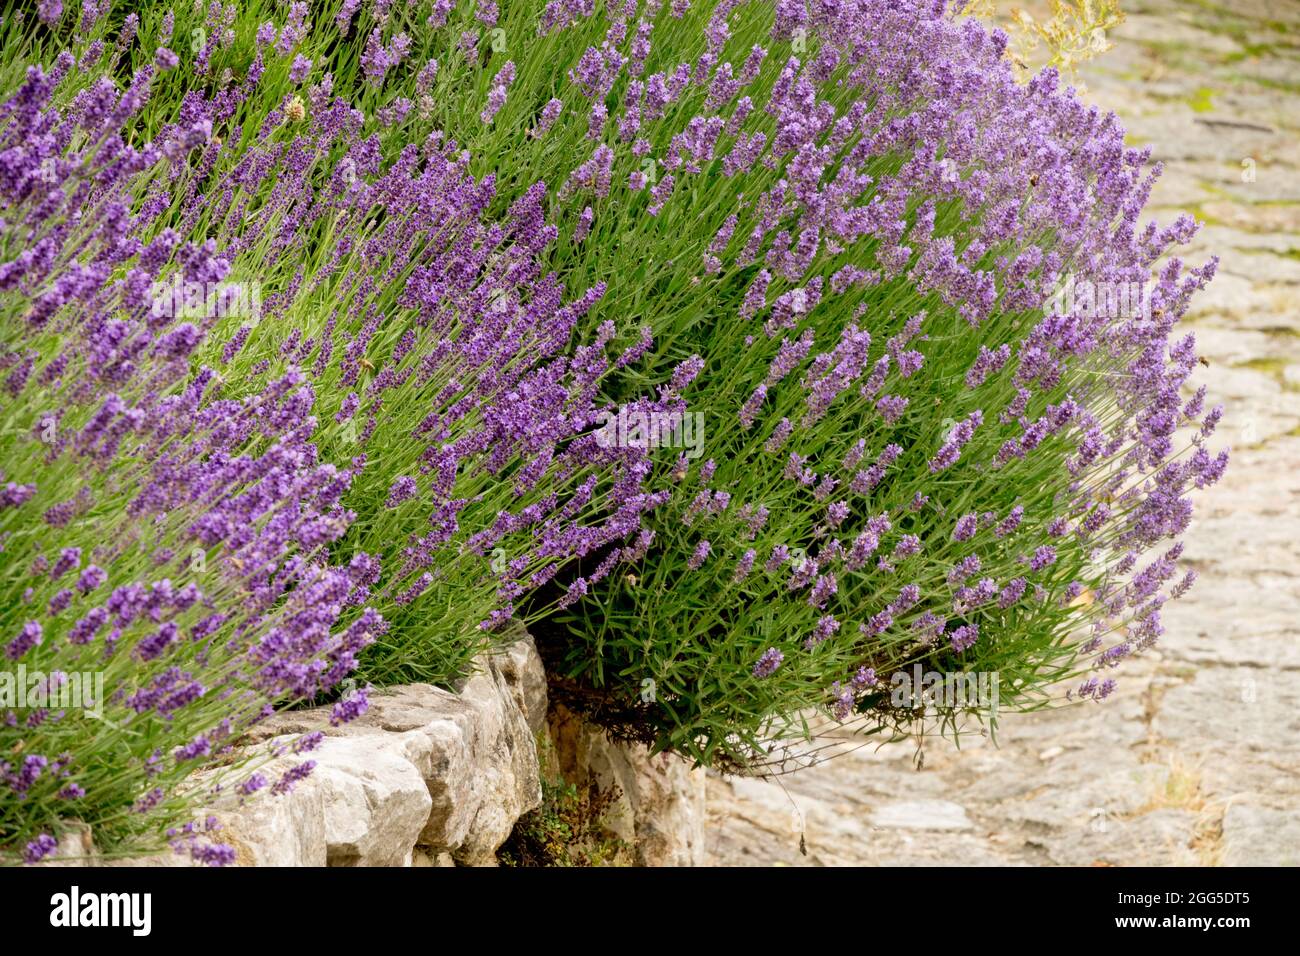 Blooming lavender lining the path Scented, Lavender, Hedge Stock Photo